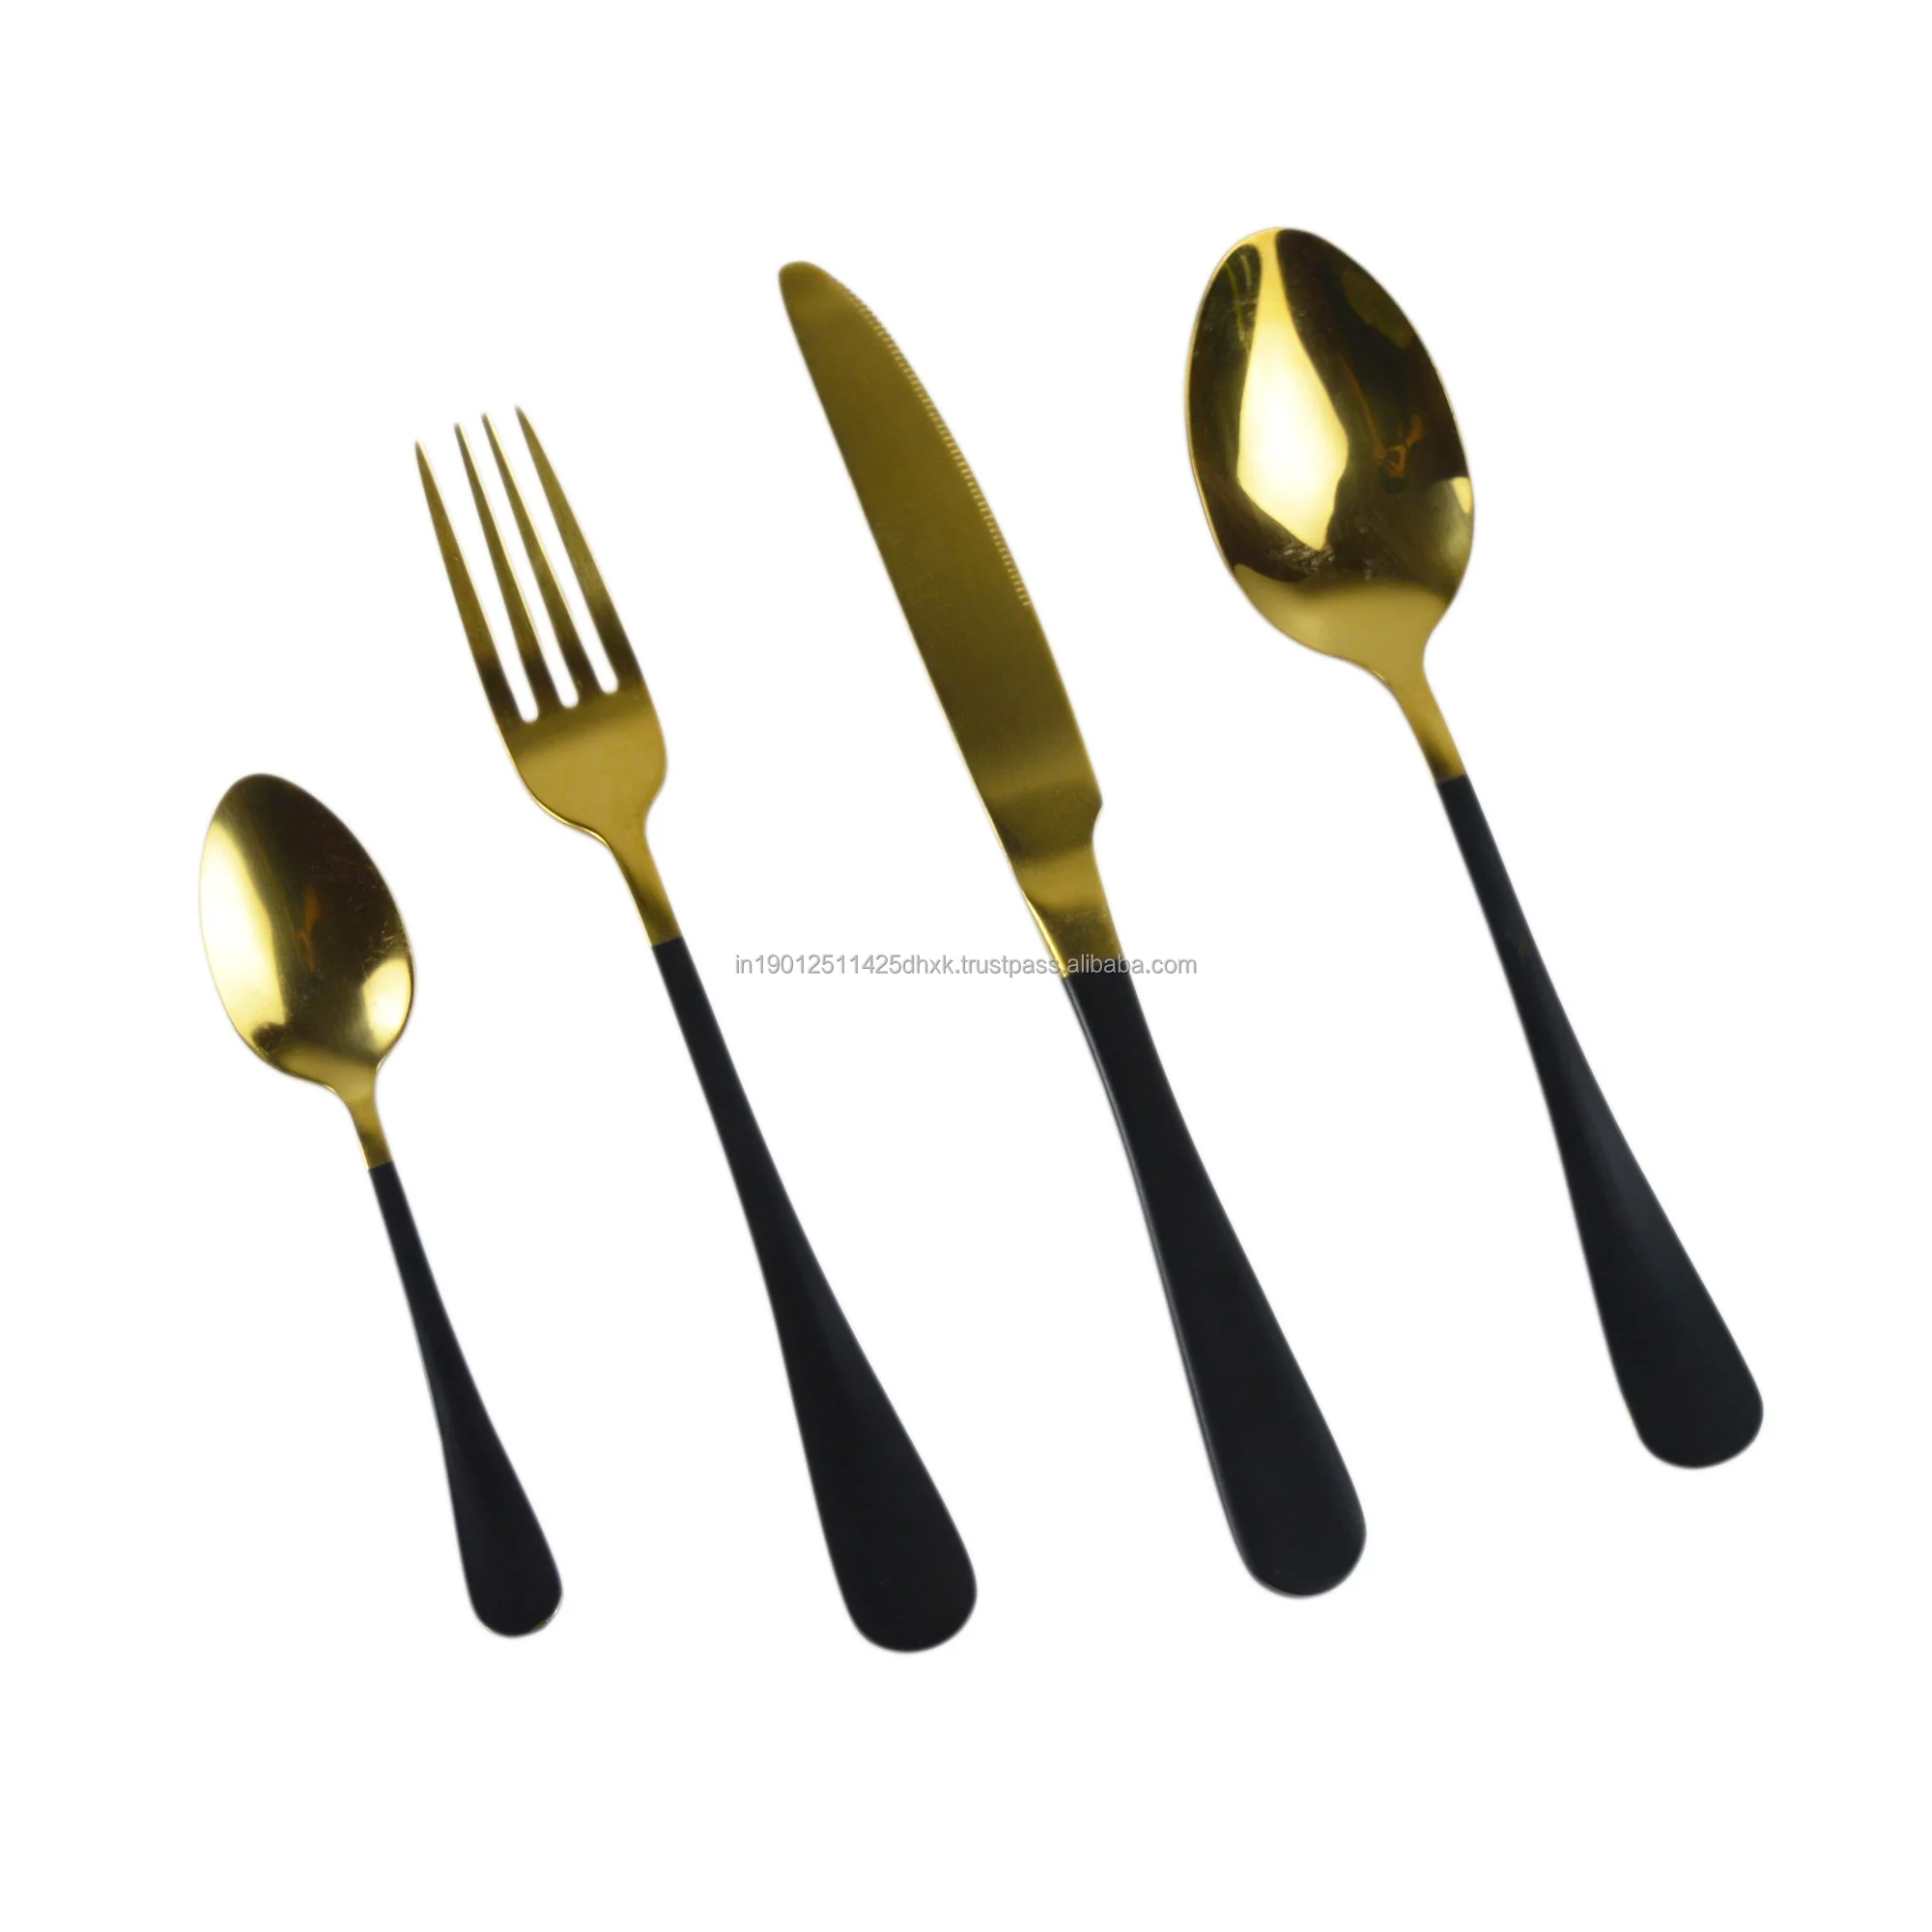 Creative Royal Design Cutlery Set Indoor Decor Tableware Metal Spoons And Forks Wedding Party And Festive Design Flatware